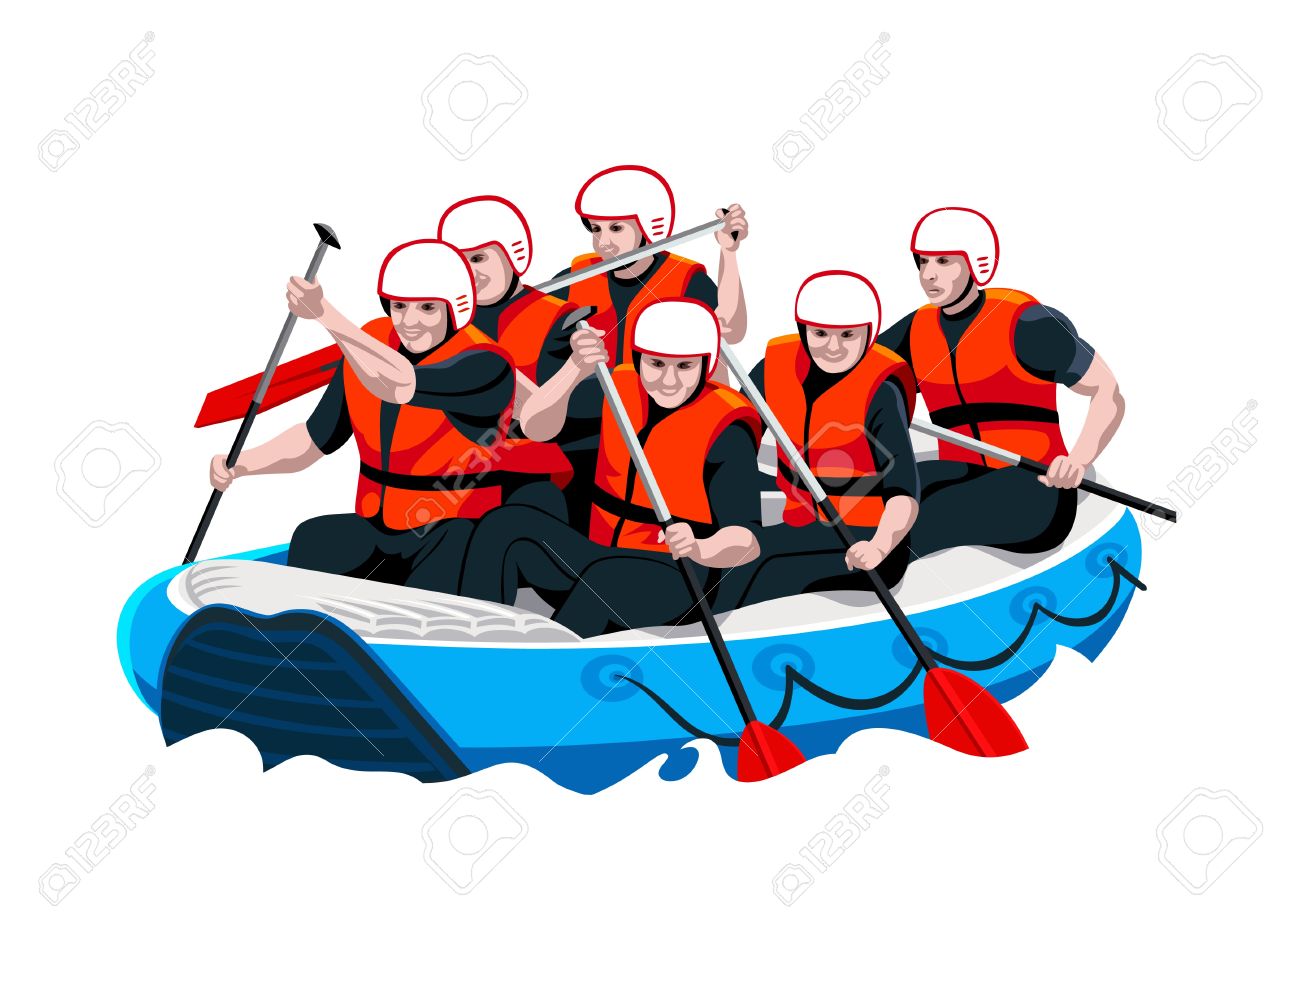 151 Rowing Teamwork Stock Vector Illustration And Royalty Free.